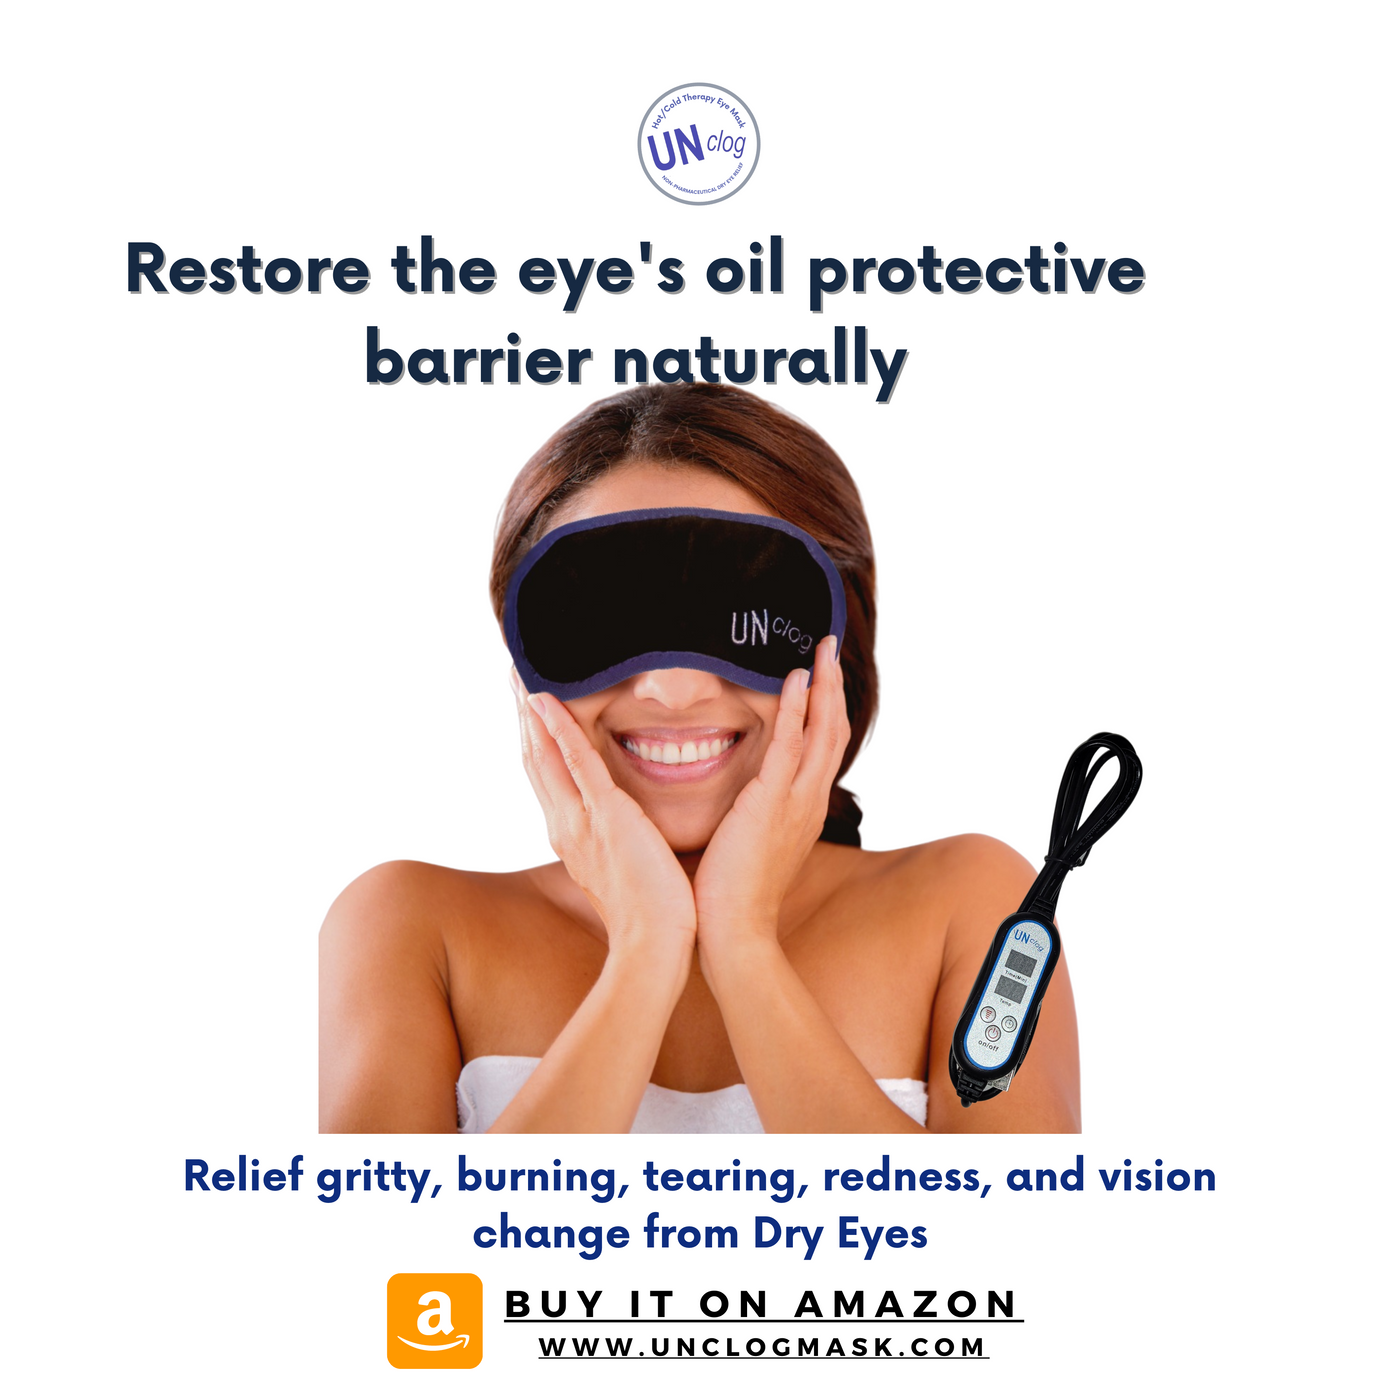 Restore the eye's oil protective barrier naturally.